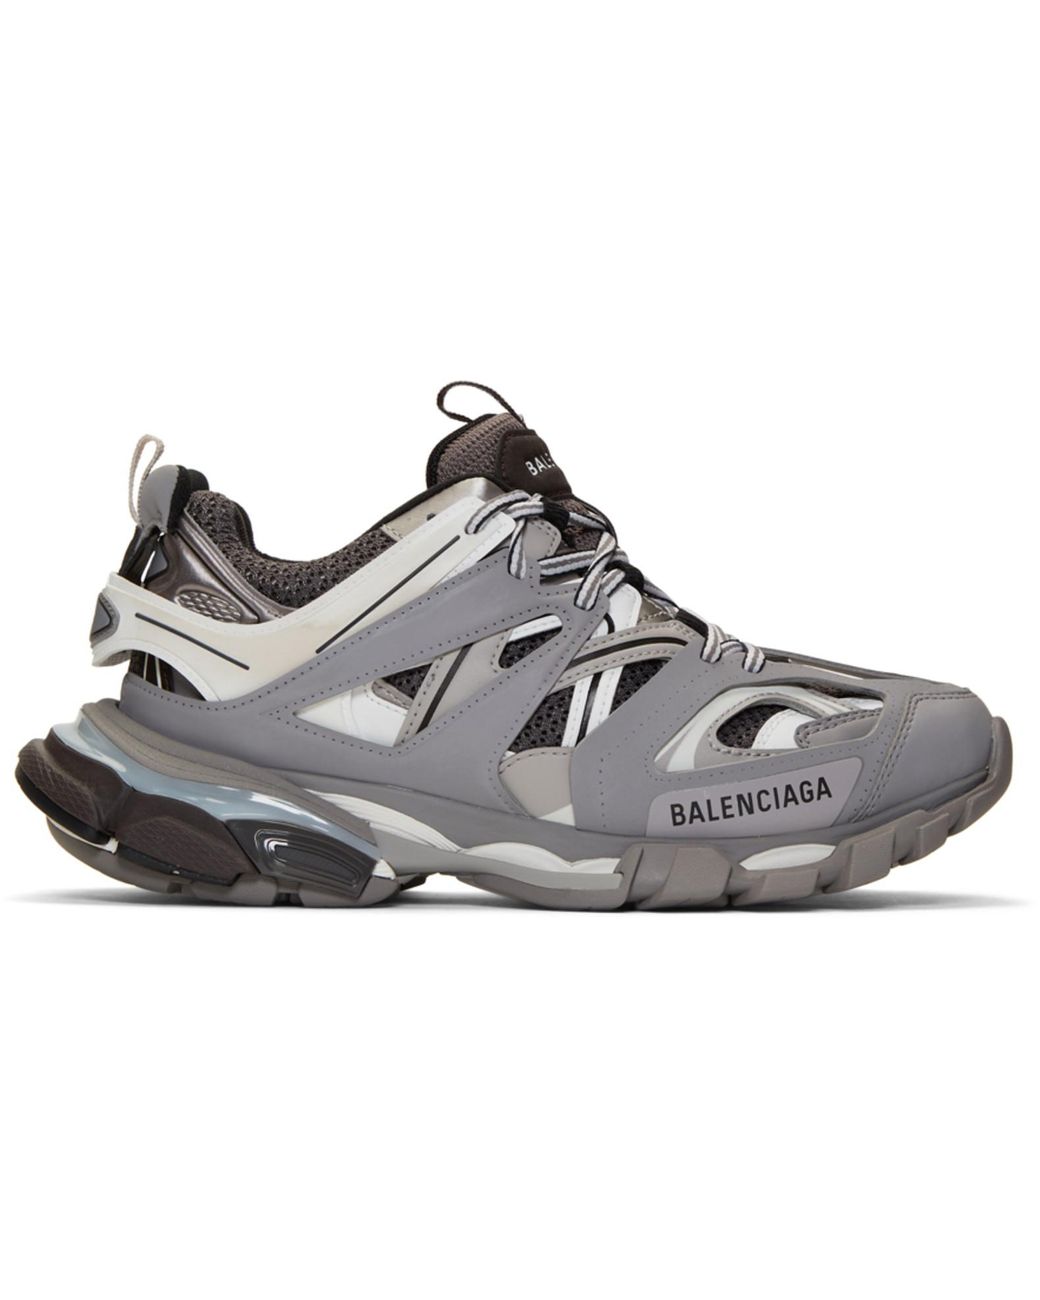 Balenciaga Rubber Track Trainers in Grey/White (Gray) for Men - Save 68 ...